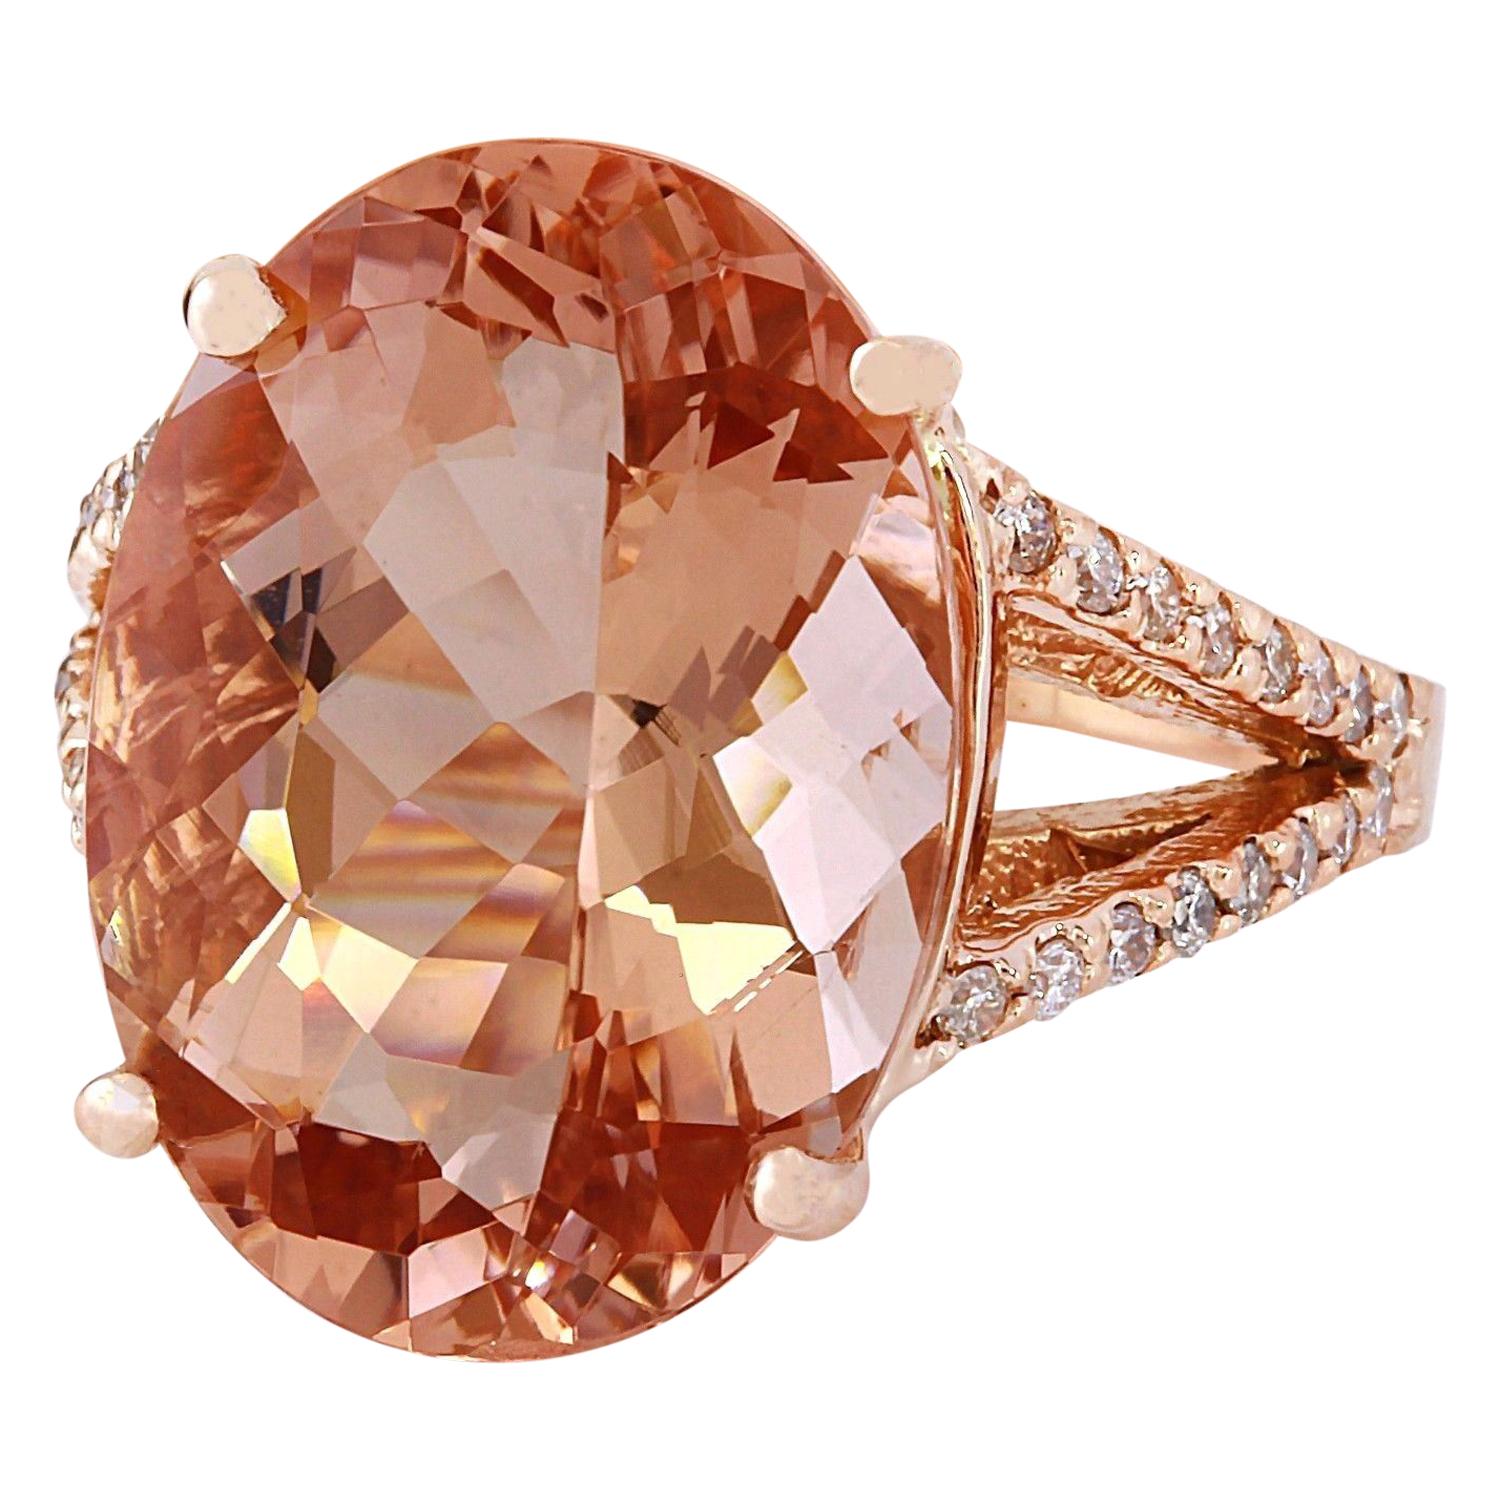 11.30 Carat Natural Morganite 18K Solid Rose Gold Diamond Ring
 Item Type: Ring
 Item Style: Cocktail
 Material: 18K Rose Gold
 Mainstone: Morganite
 Stone Color: Peach
 Stone Weight: 11.00 Carat
 Stone Shape: Oval
 Stone Quantity: 1
 Stone